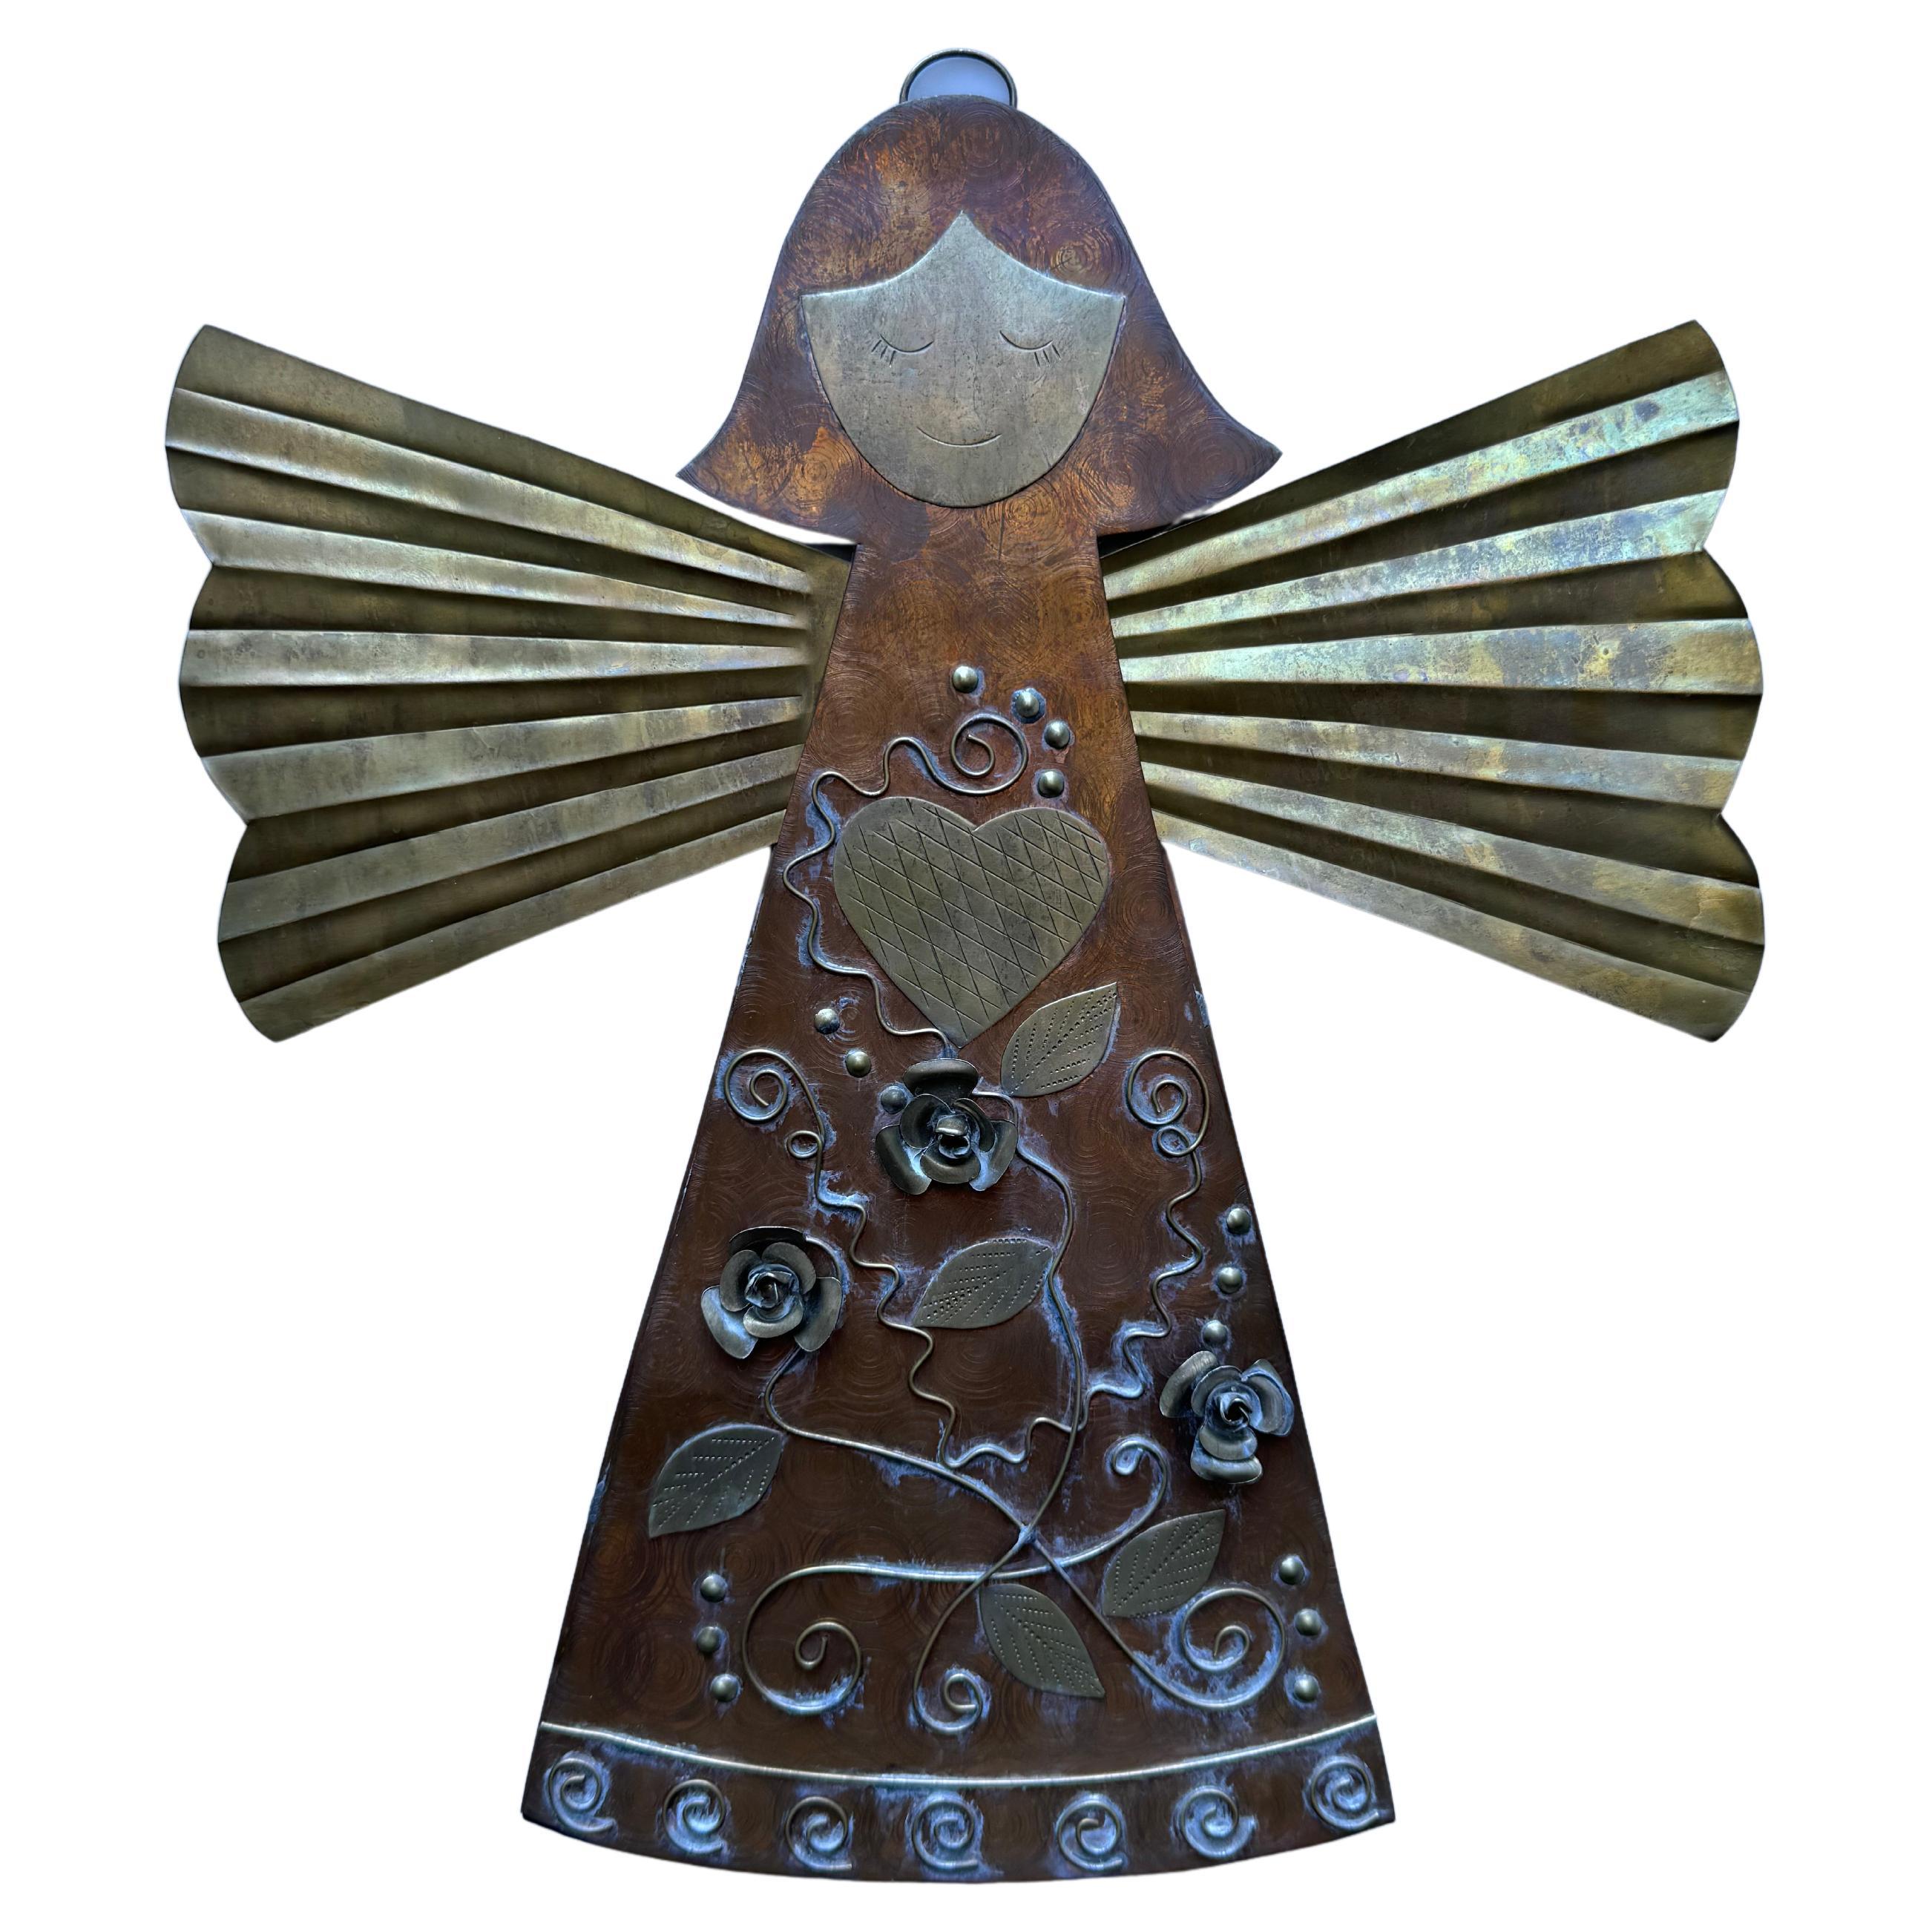 Detailed Handmade Copper And Brass Hanging Angel Sculpture For Sale